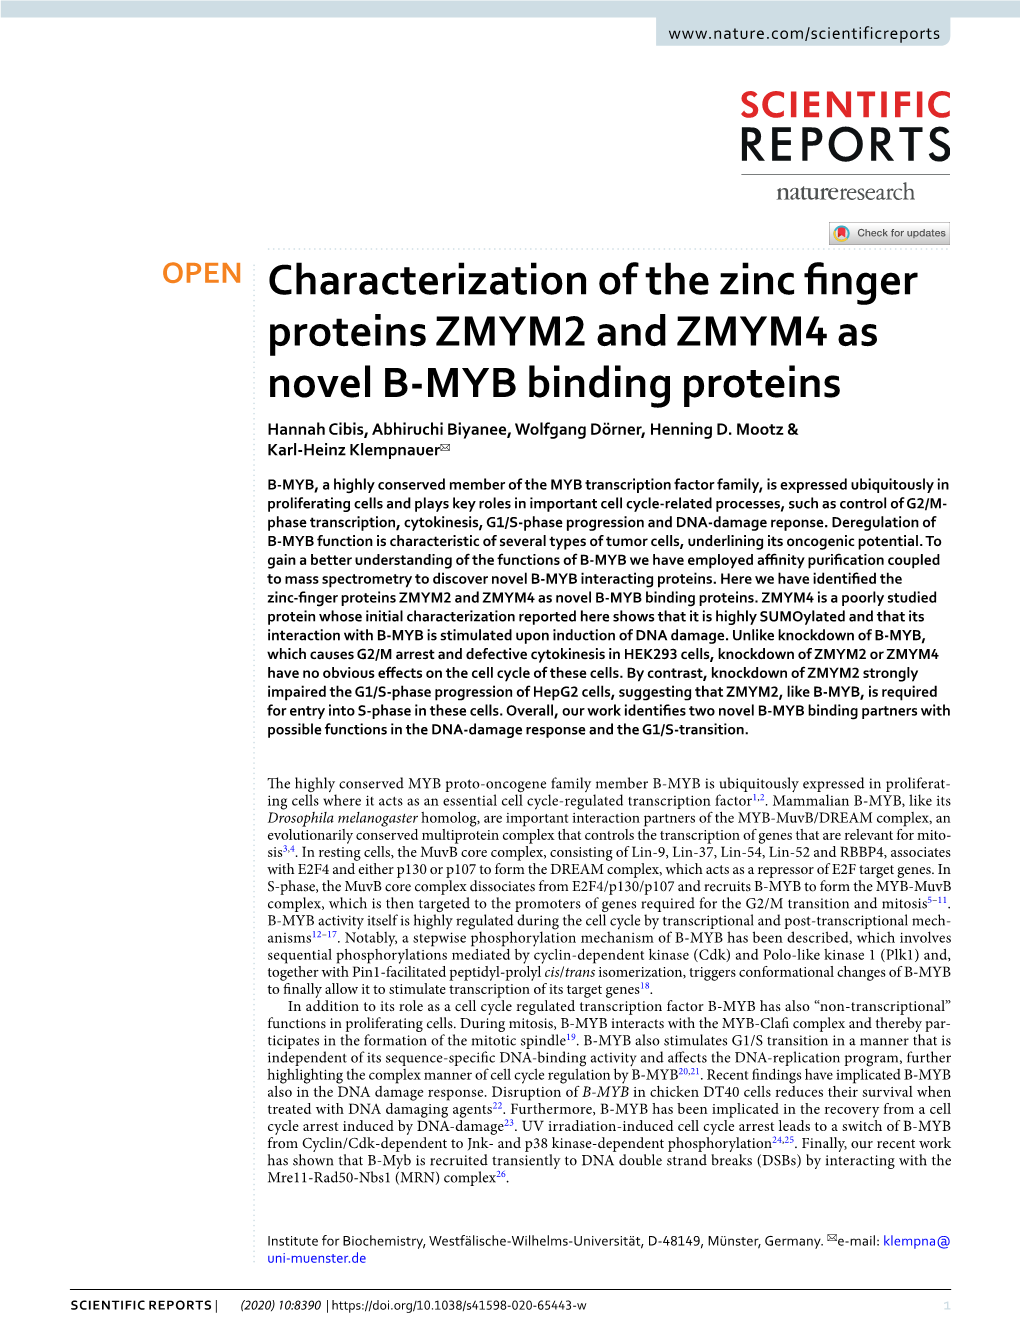 Characterization of the Zinc Finger Proteins ZMYM2 and ZMYM4 As